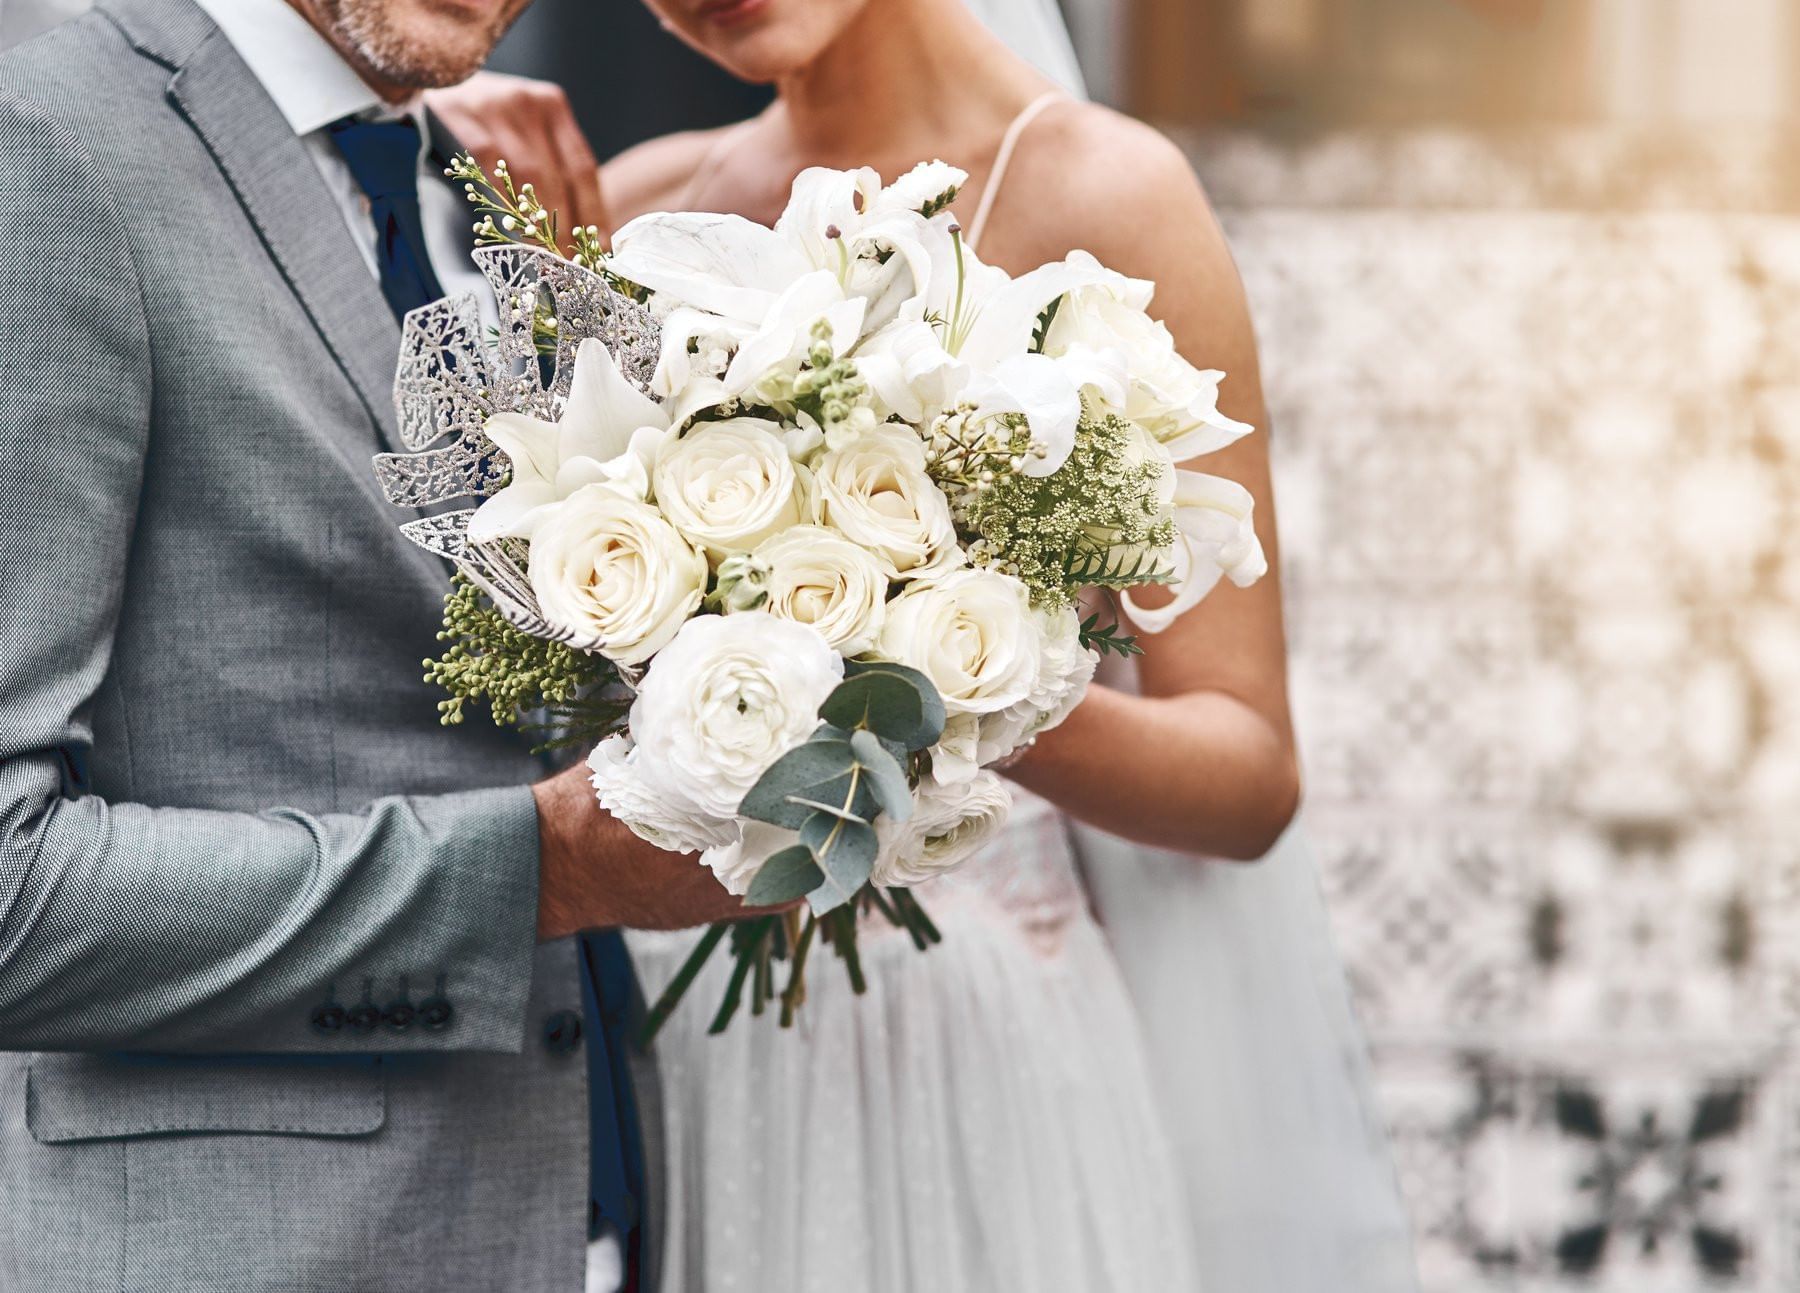 Wedded couple holding a bouquet at Fiesta Americana Hotels